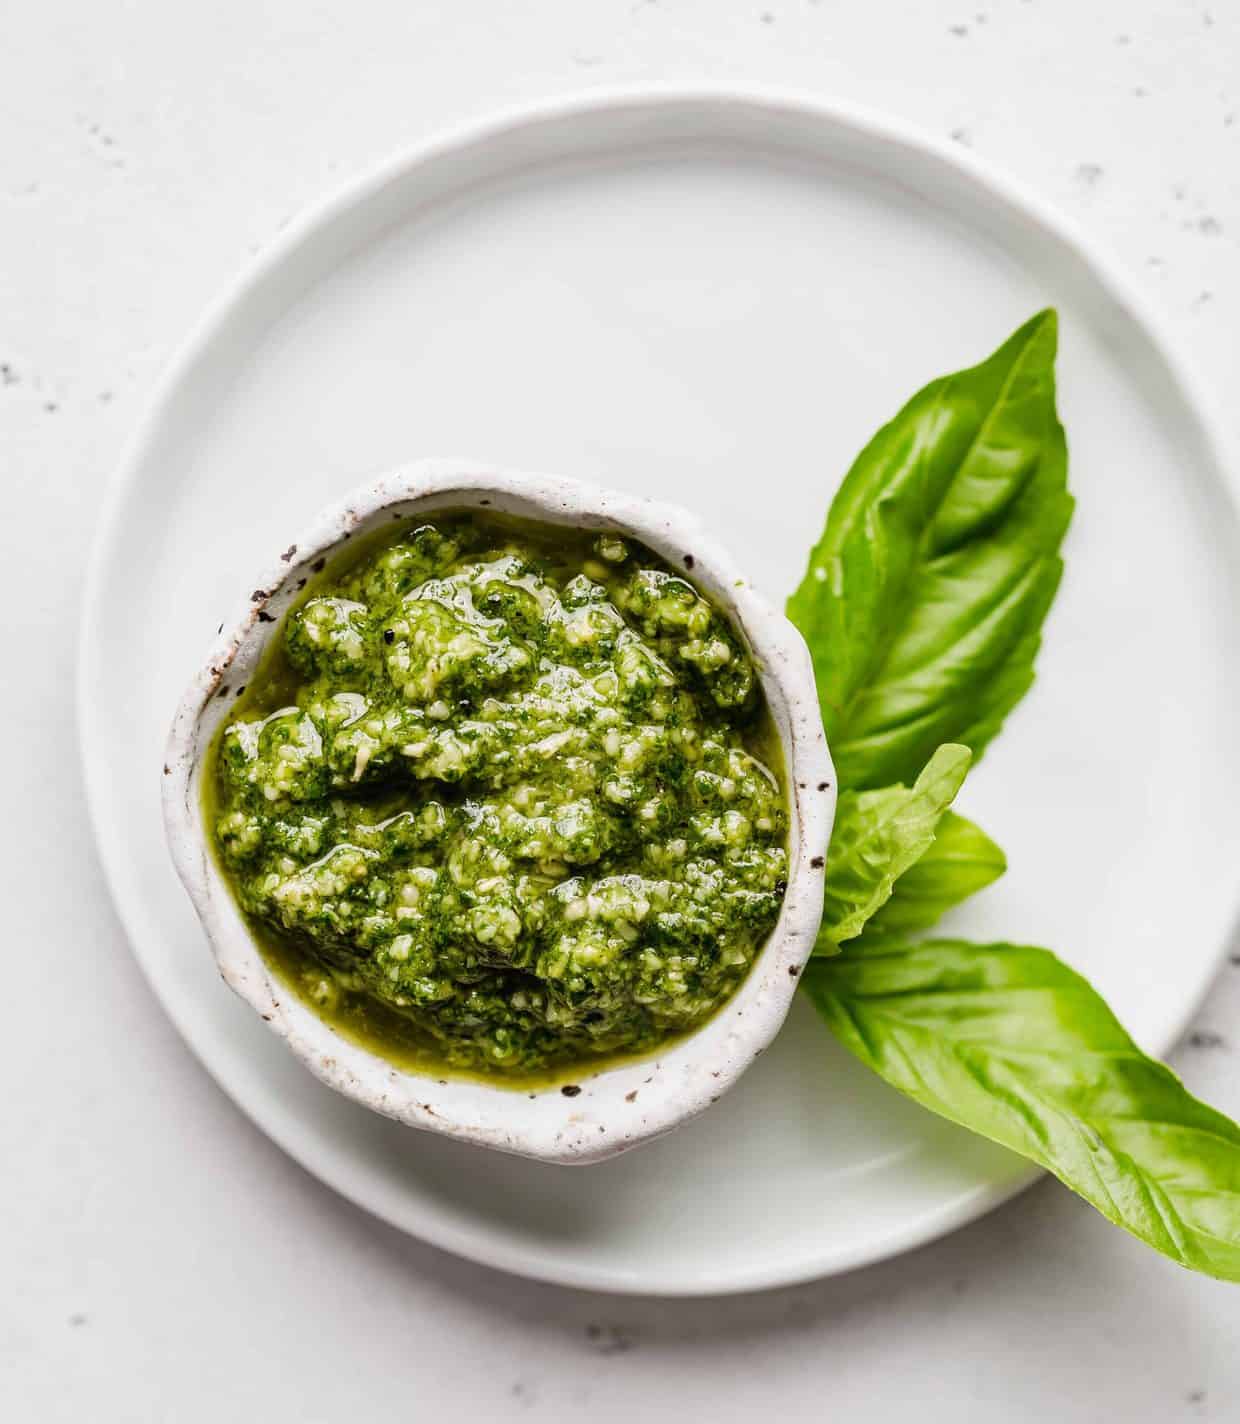 Basil pesto in a small white bowl against a white background.